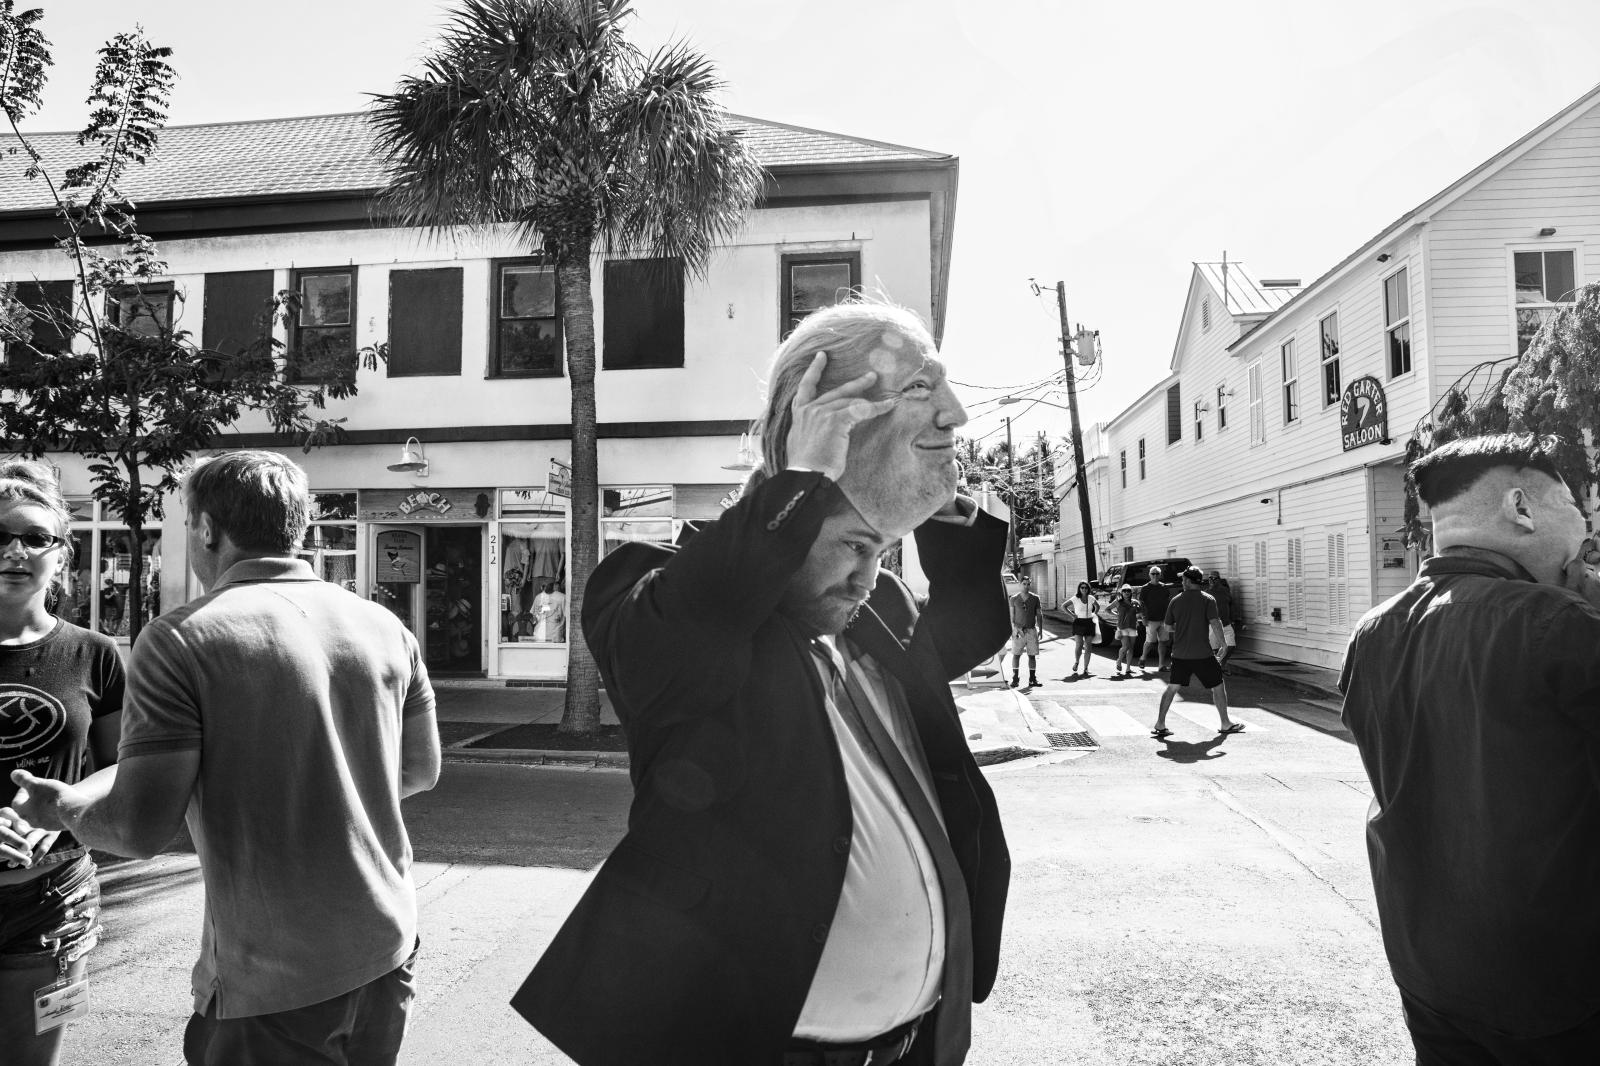 Image from Street - Key West, FL Duval Street March 2019